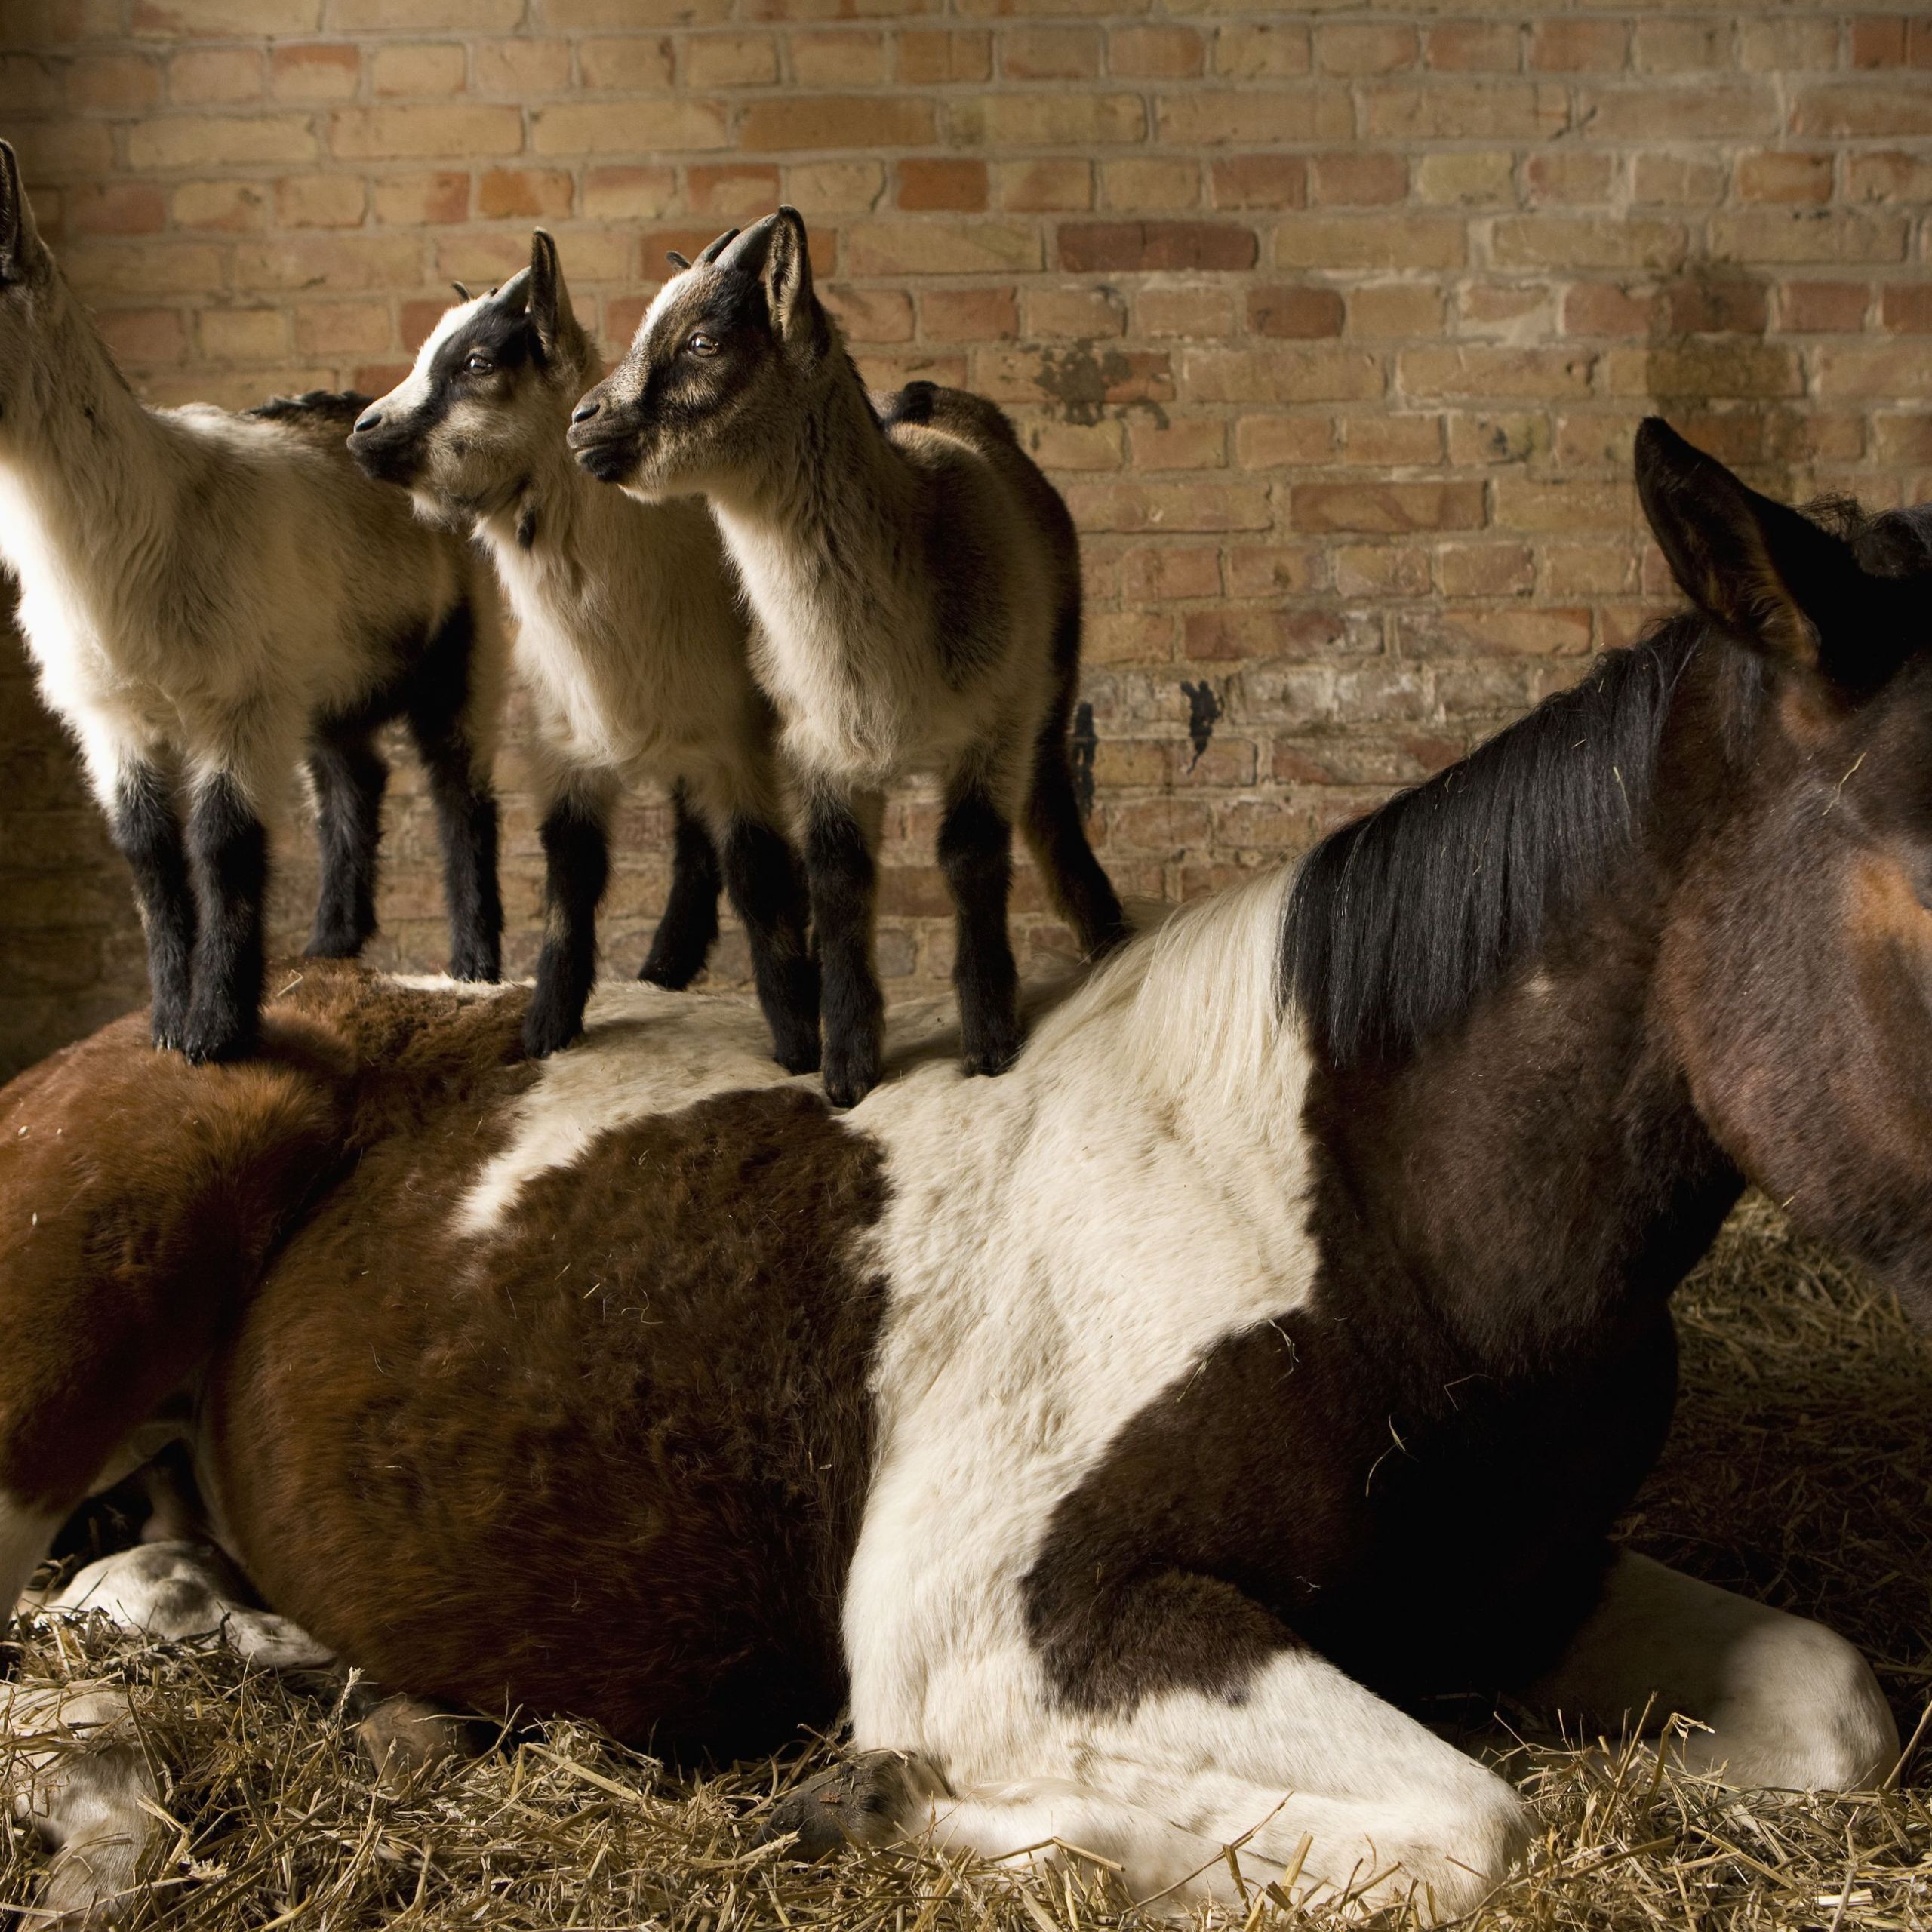 young goats standing on horse in stable 578e1c4d3df78c09e9e84ddd